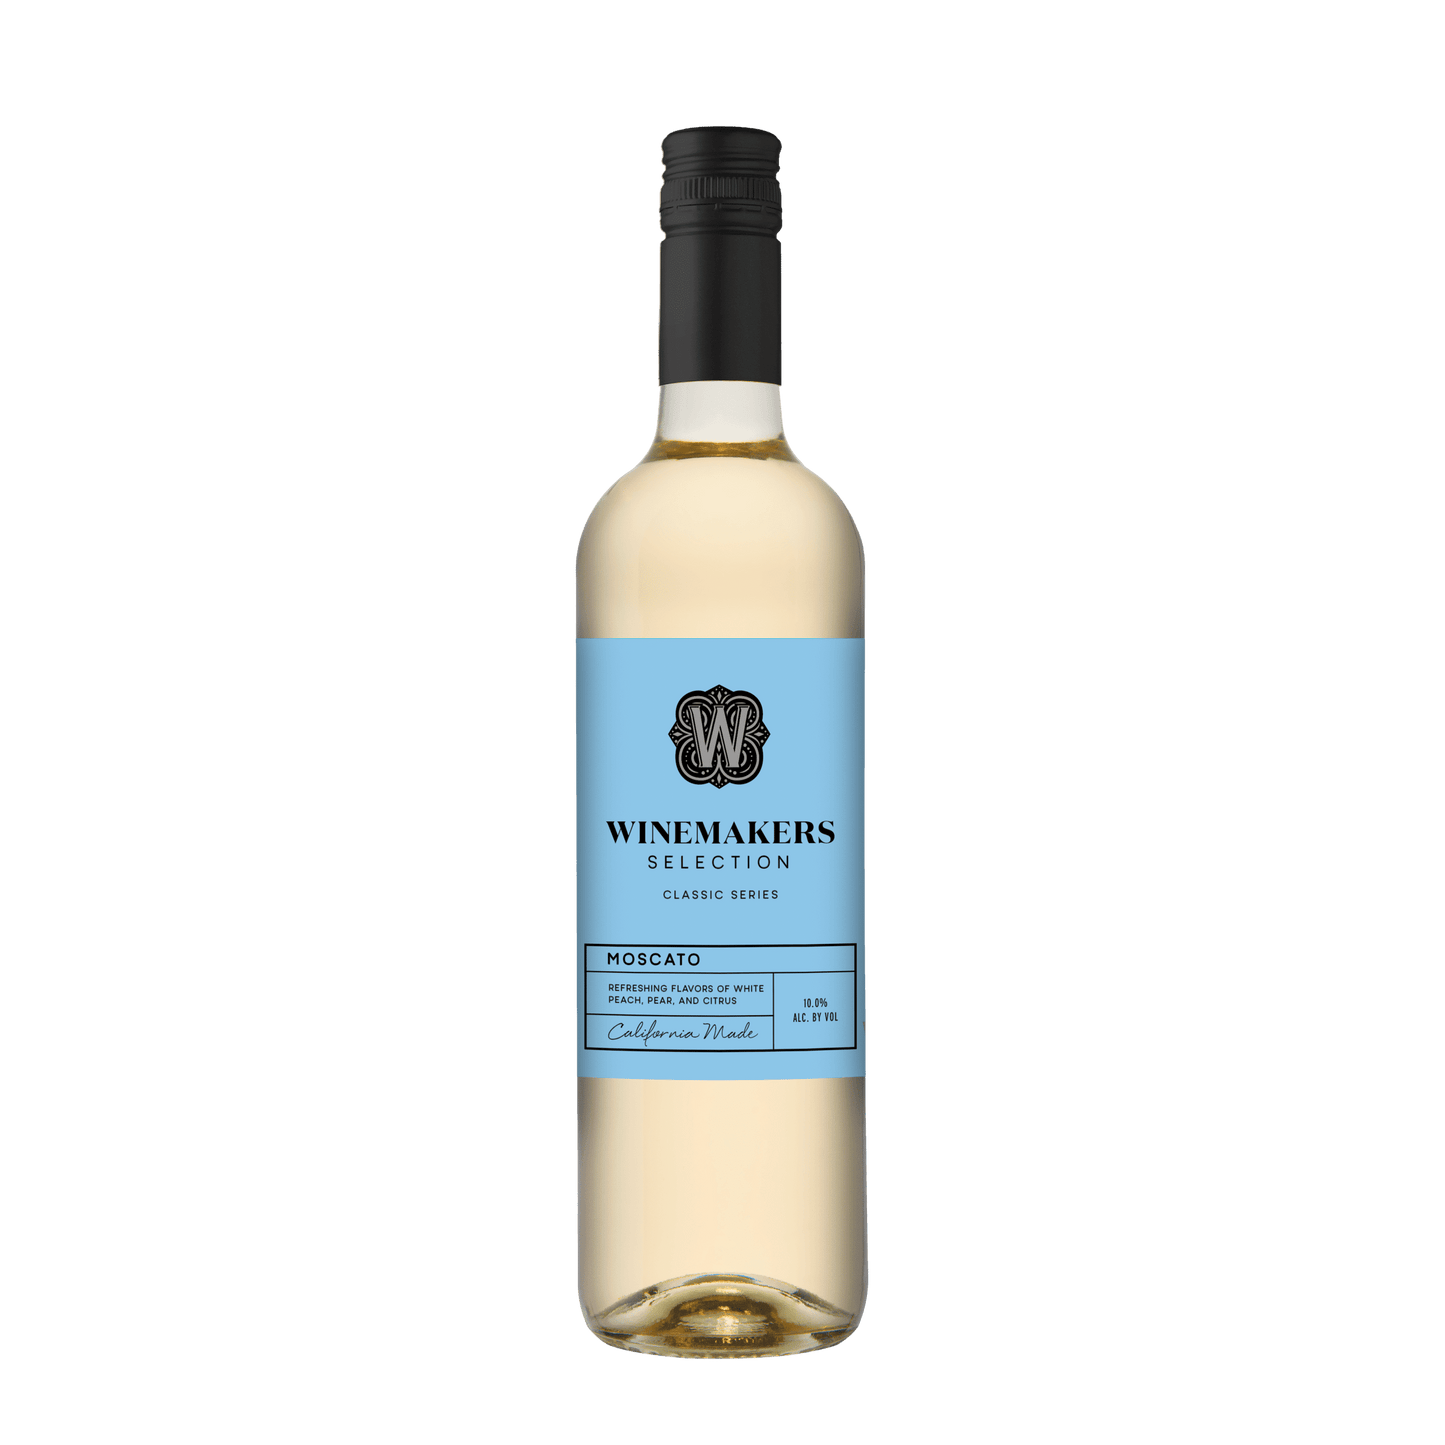 Winemakers Selection Classic Series Moscato California White Wine, 750 ml Glass, ABV 10.00%